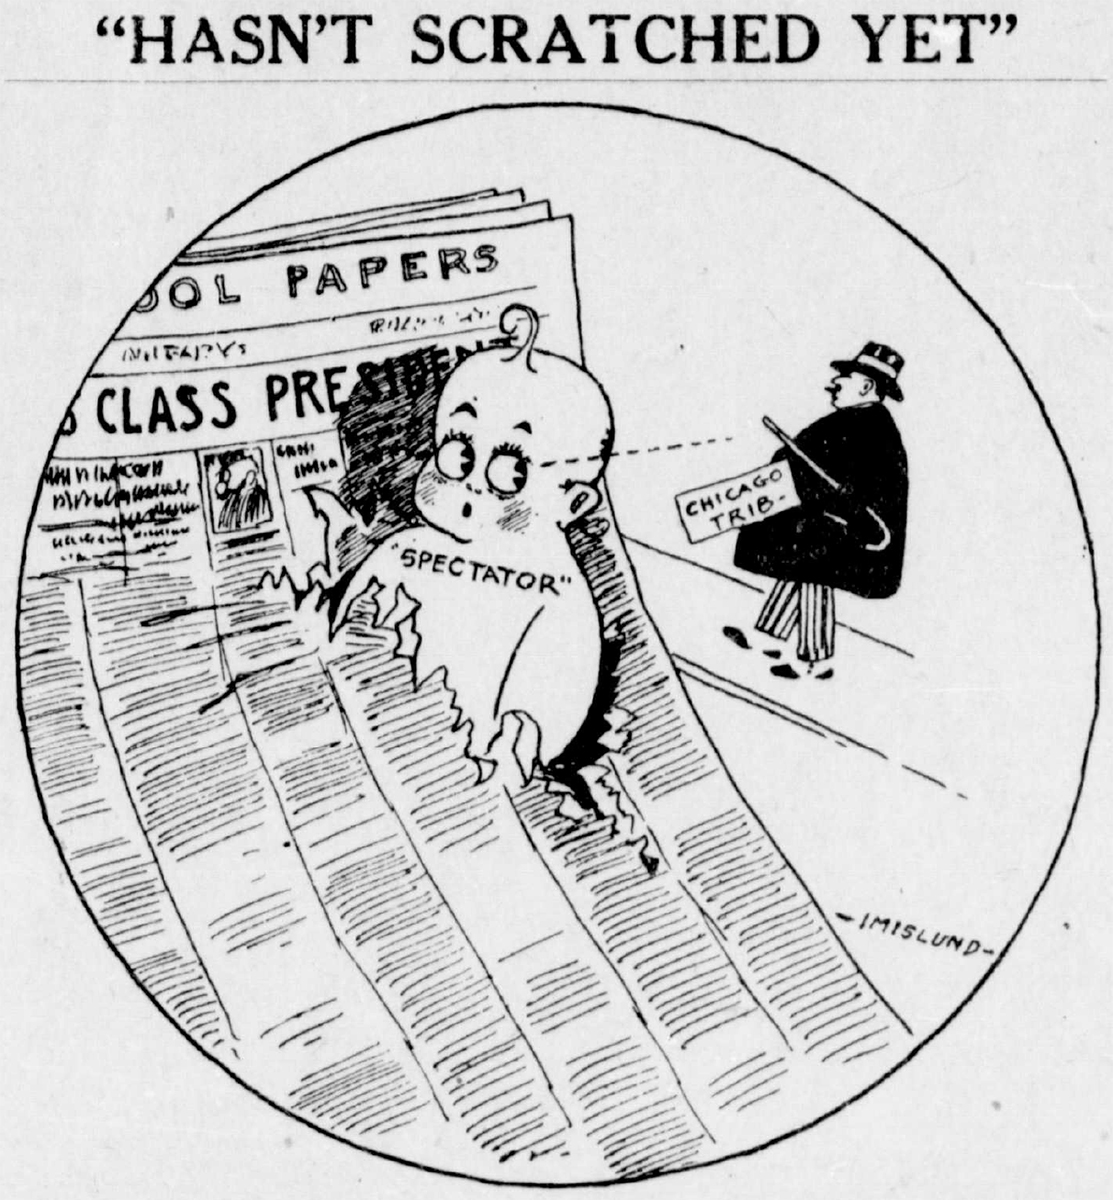 A comic drawn by Editor Clarence “Stub” Imislund that appeared on the front page of the first issue of The Spectator.